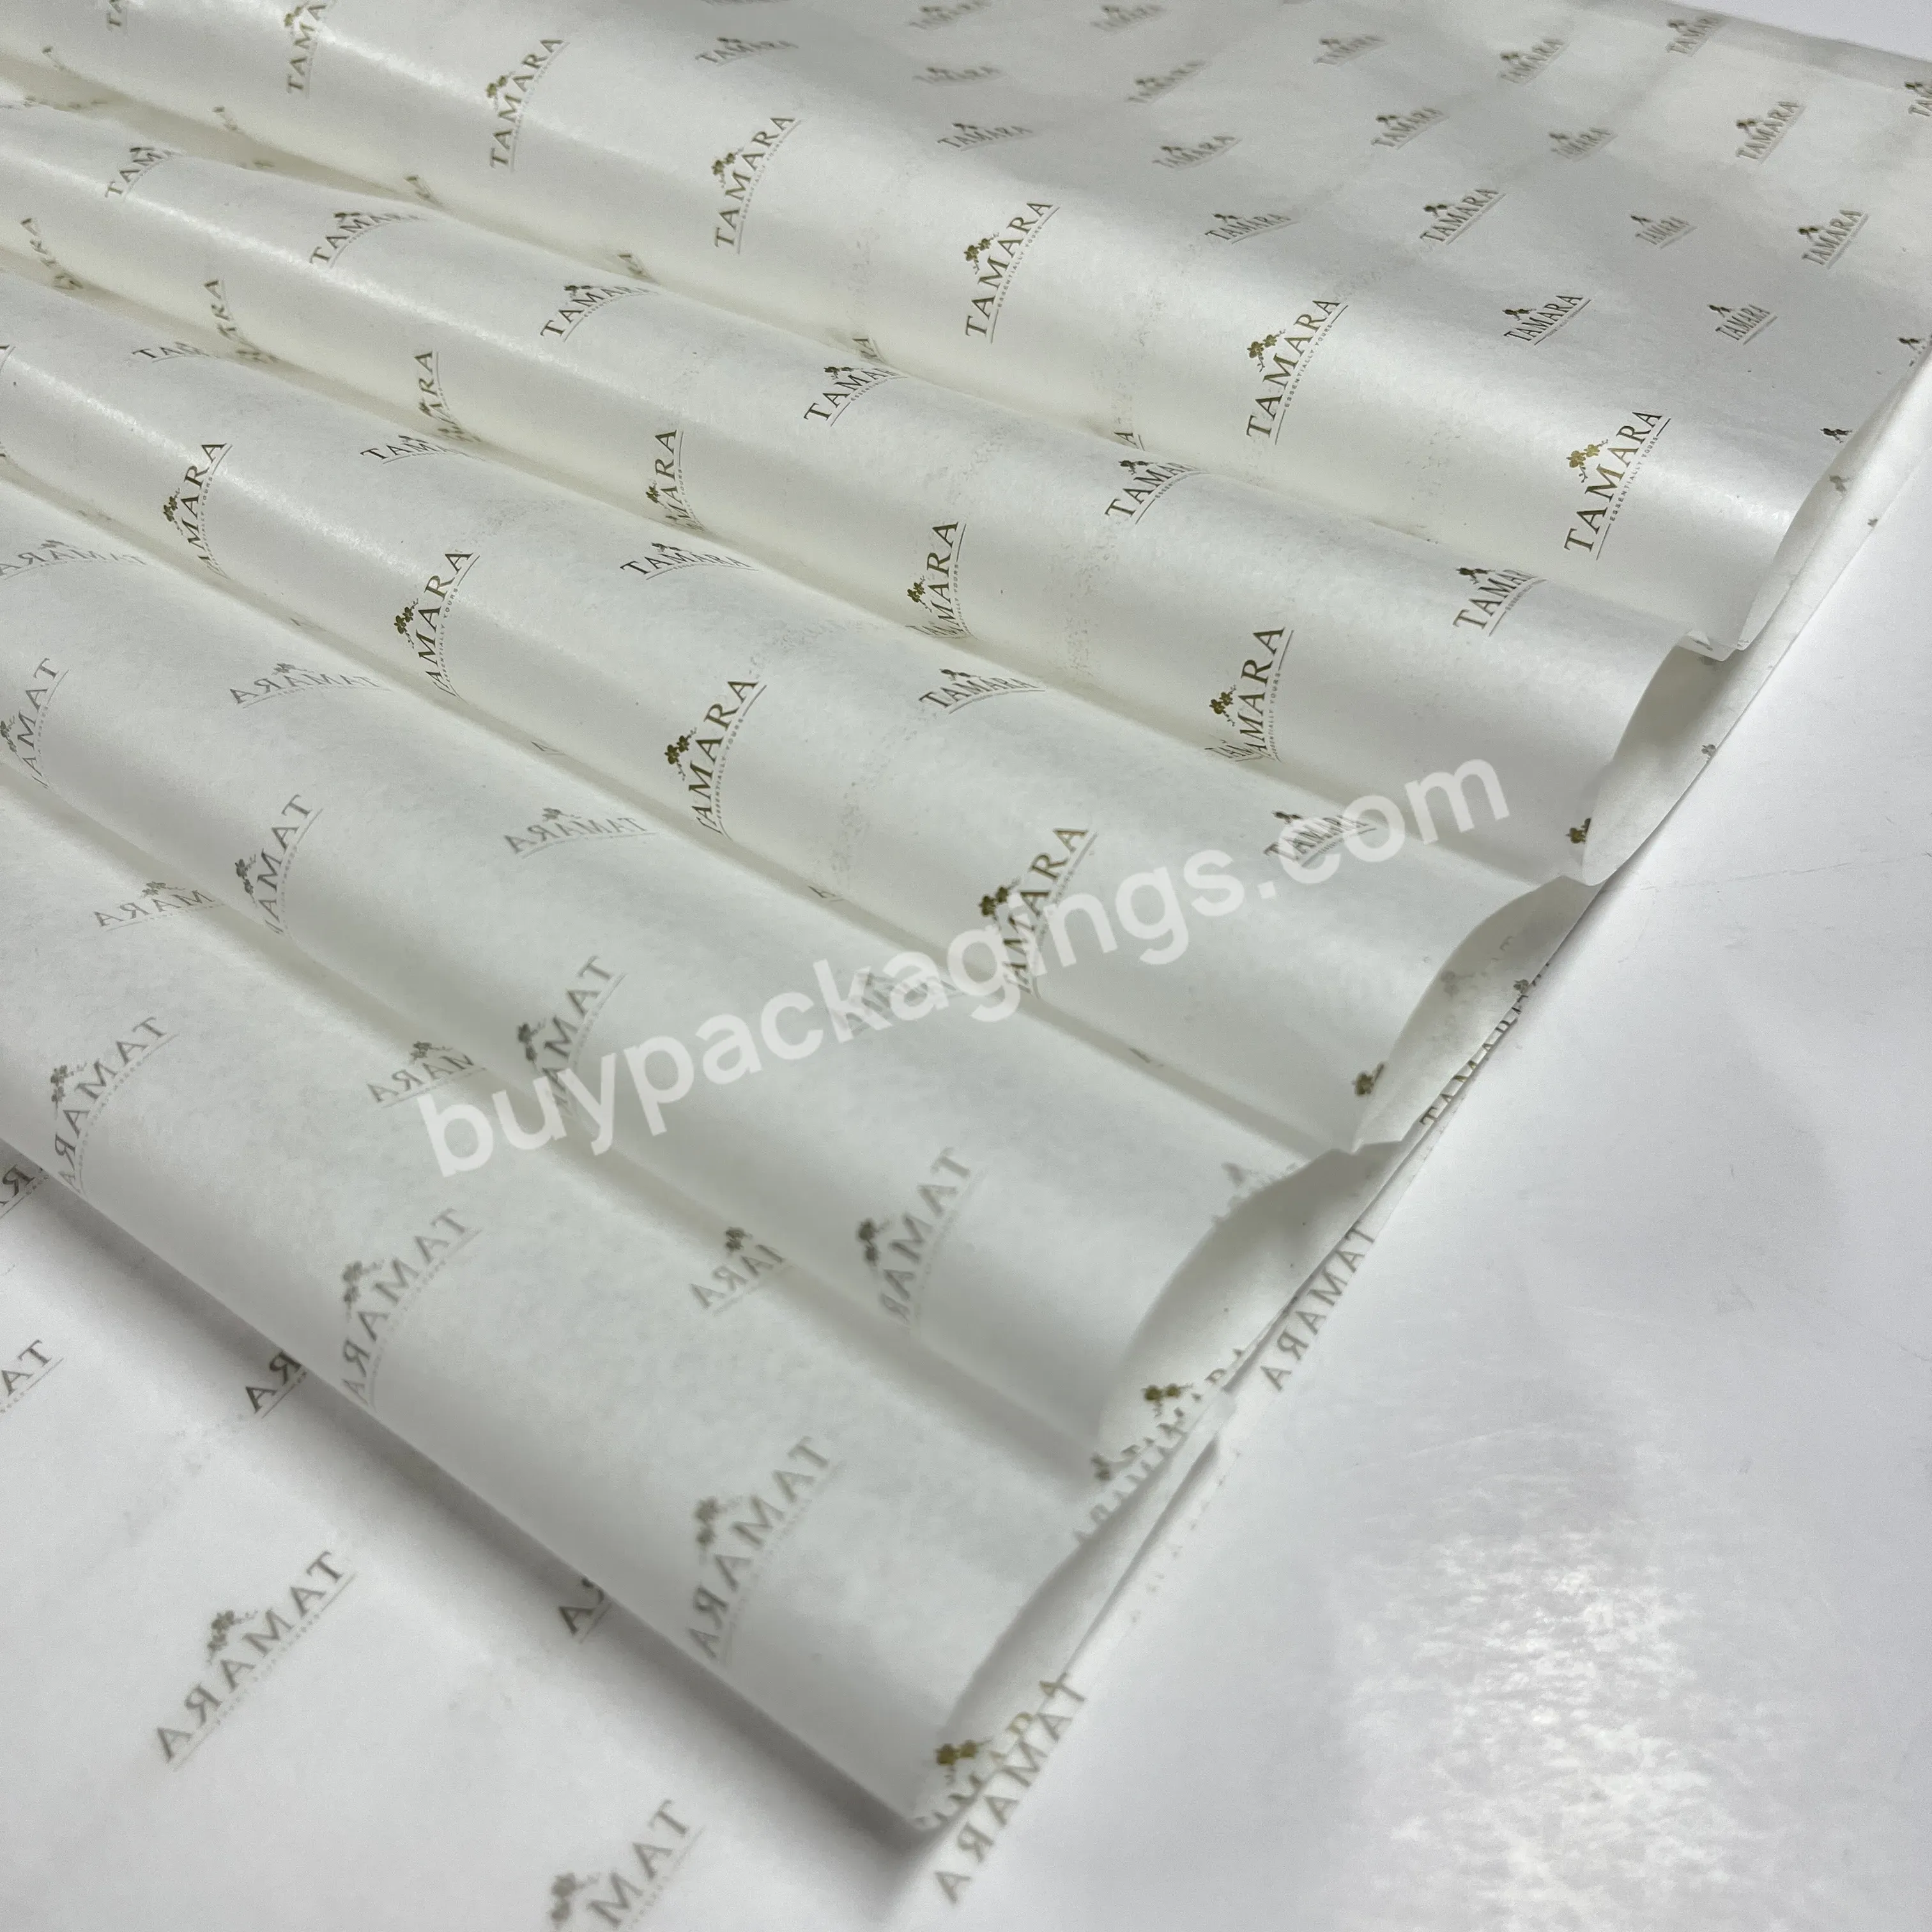 High Quality Wholesale Tissue Paper For Shoes Packaging Clothing Wrapping Tissue Paper